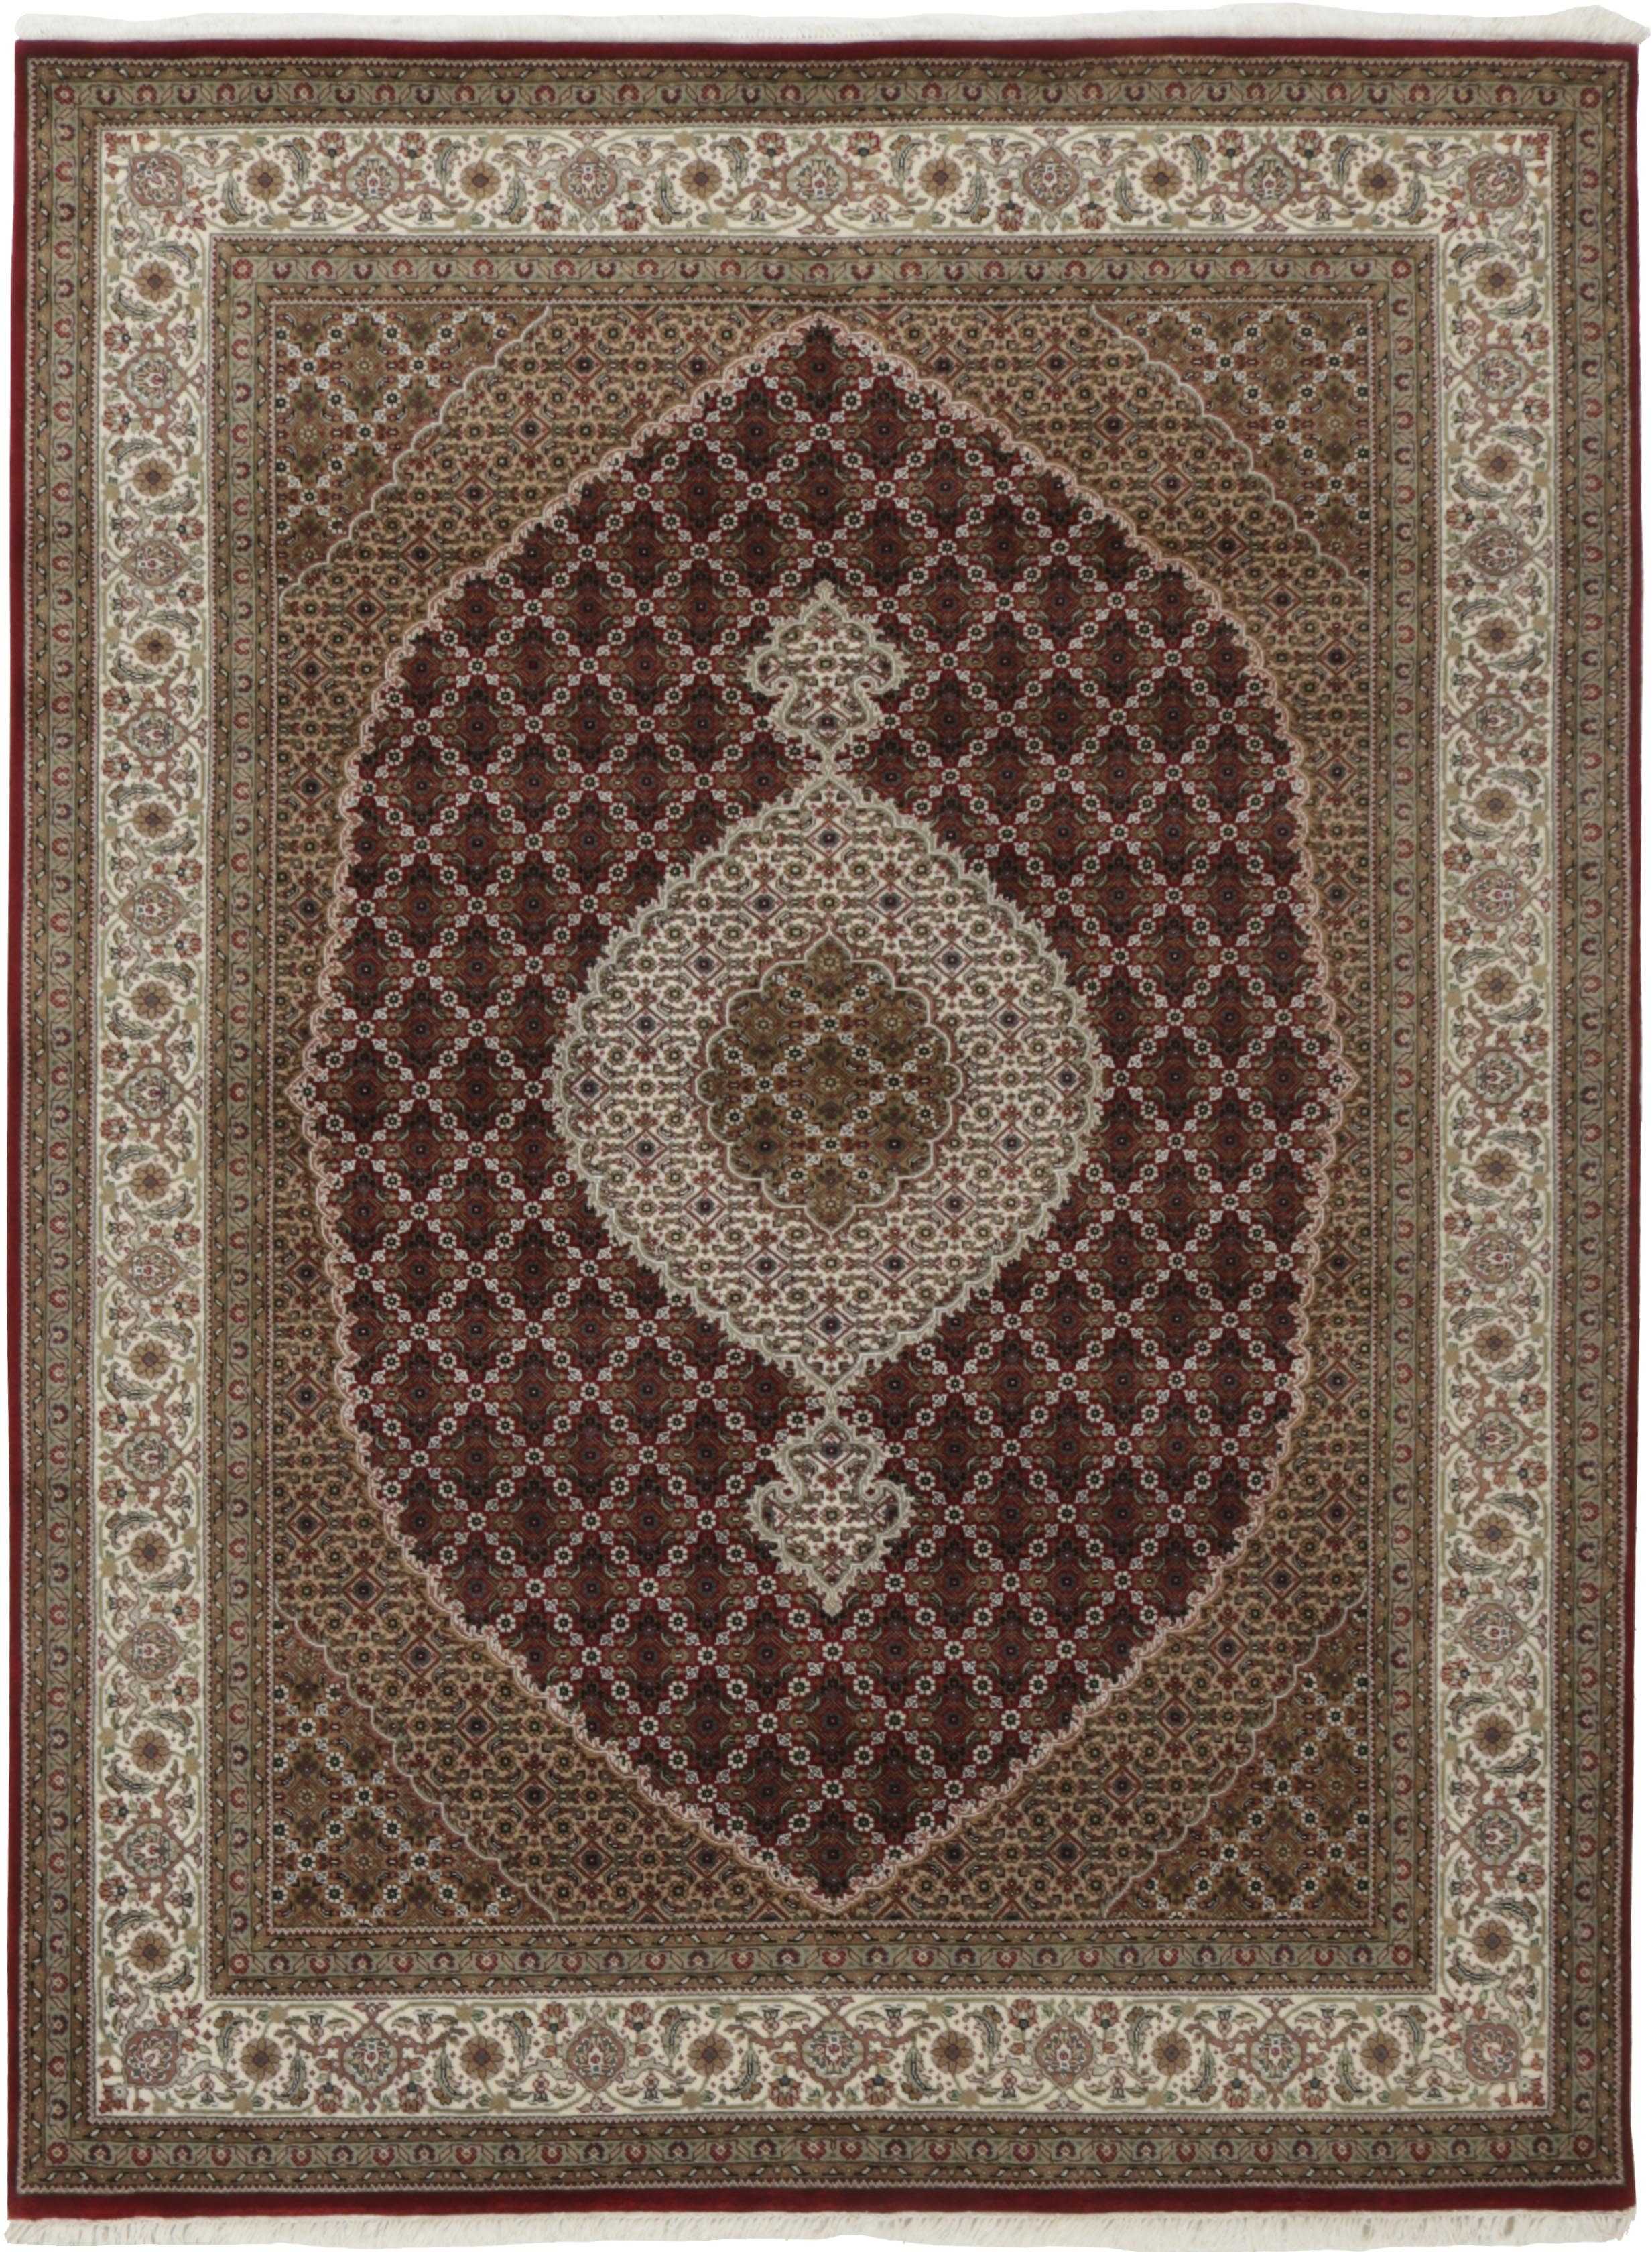 Authentic Oriental rug with traditional geometric and floral design in grey, black and beige.